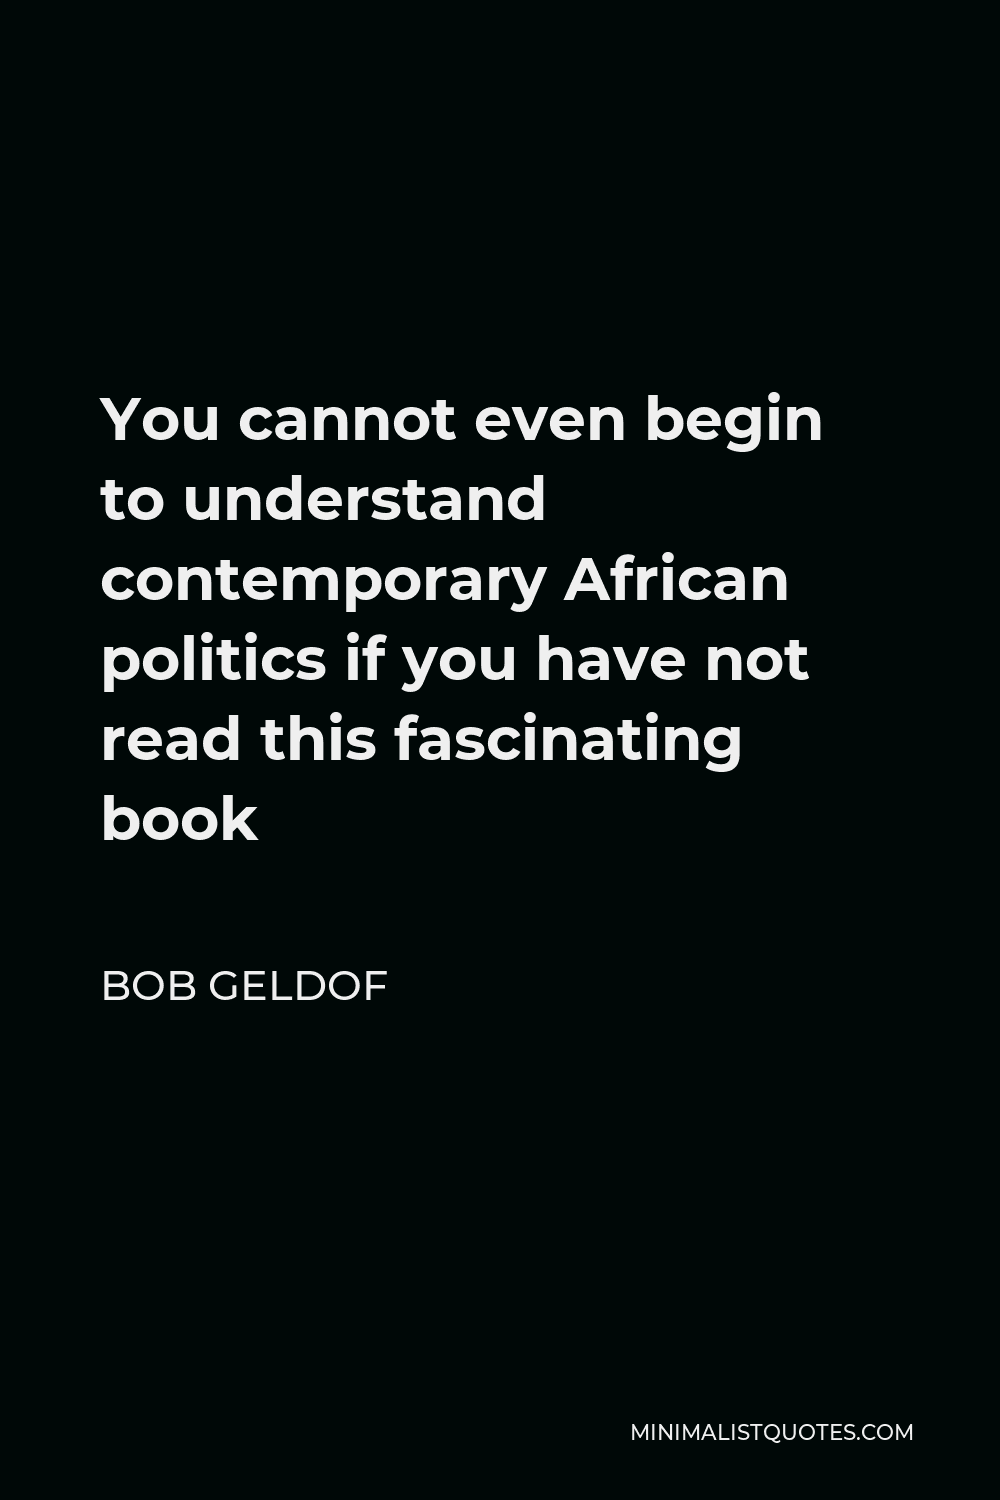 Bob Geldof Quote - You cannot even begin to understand contemporary African politics if you have not read this fascinating book